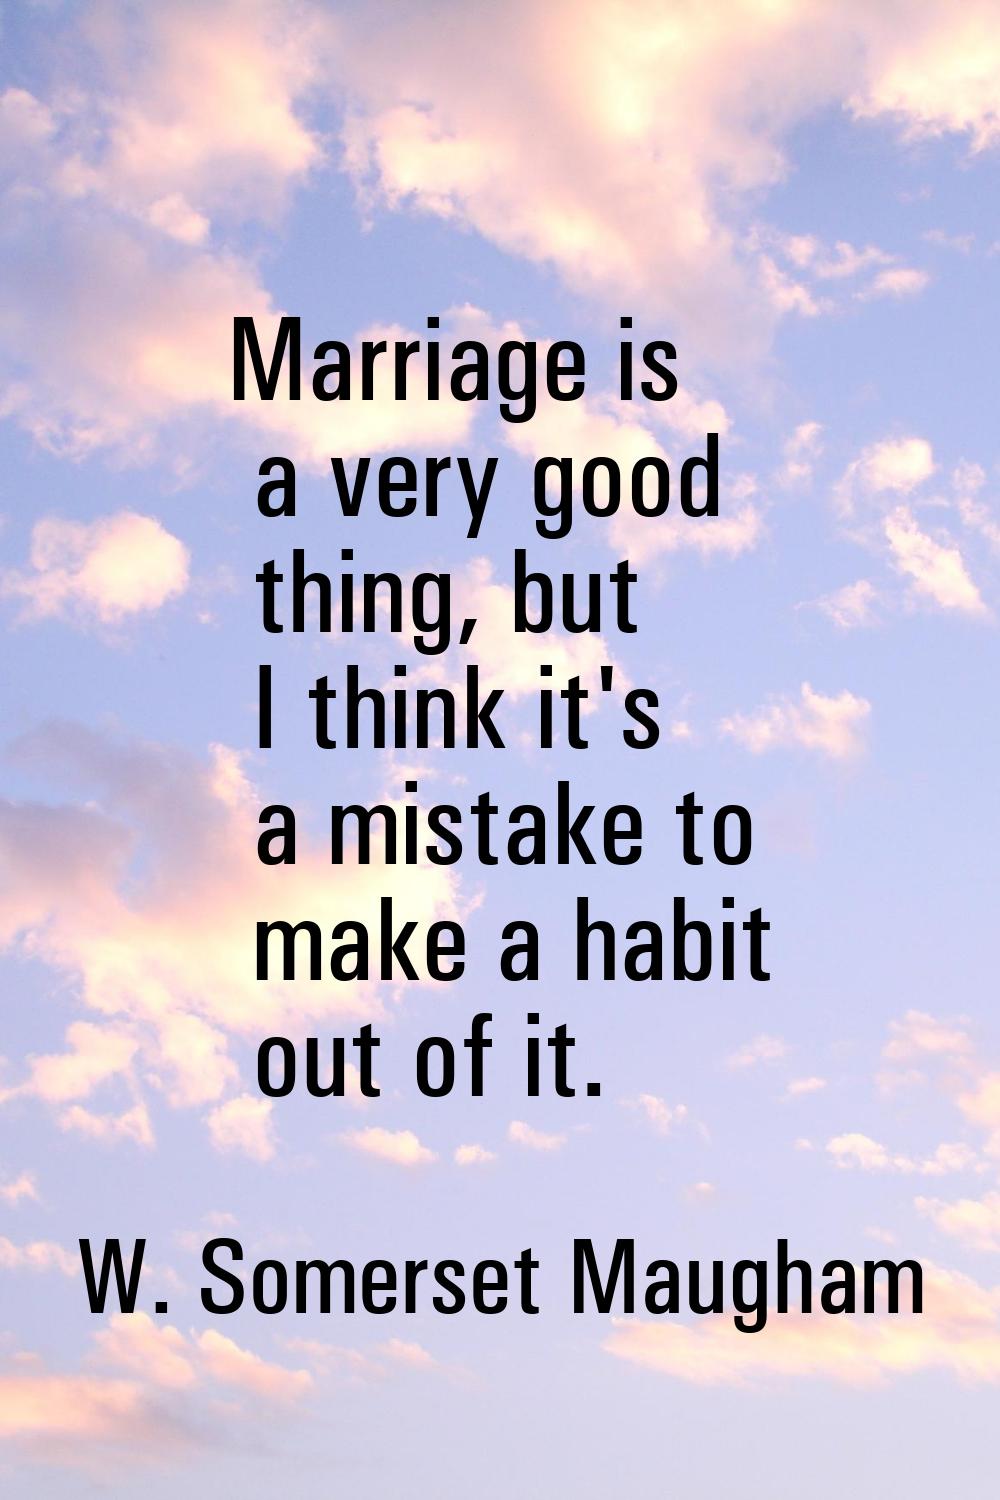 Marriage is a very good thing, but I think it's a mistake to make a habit out of it.